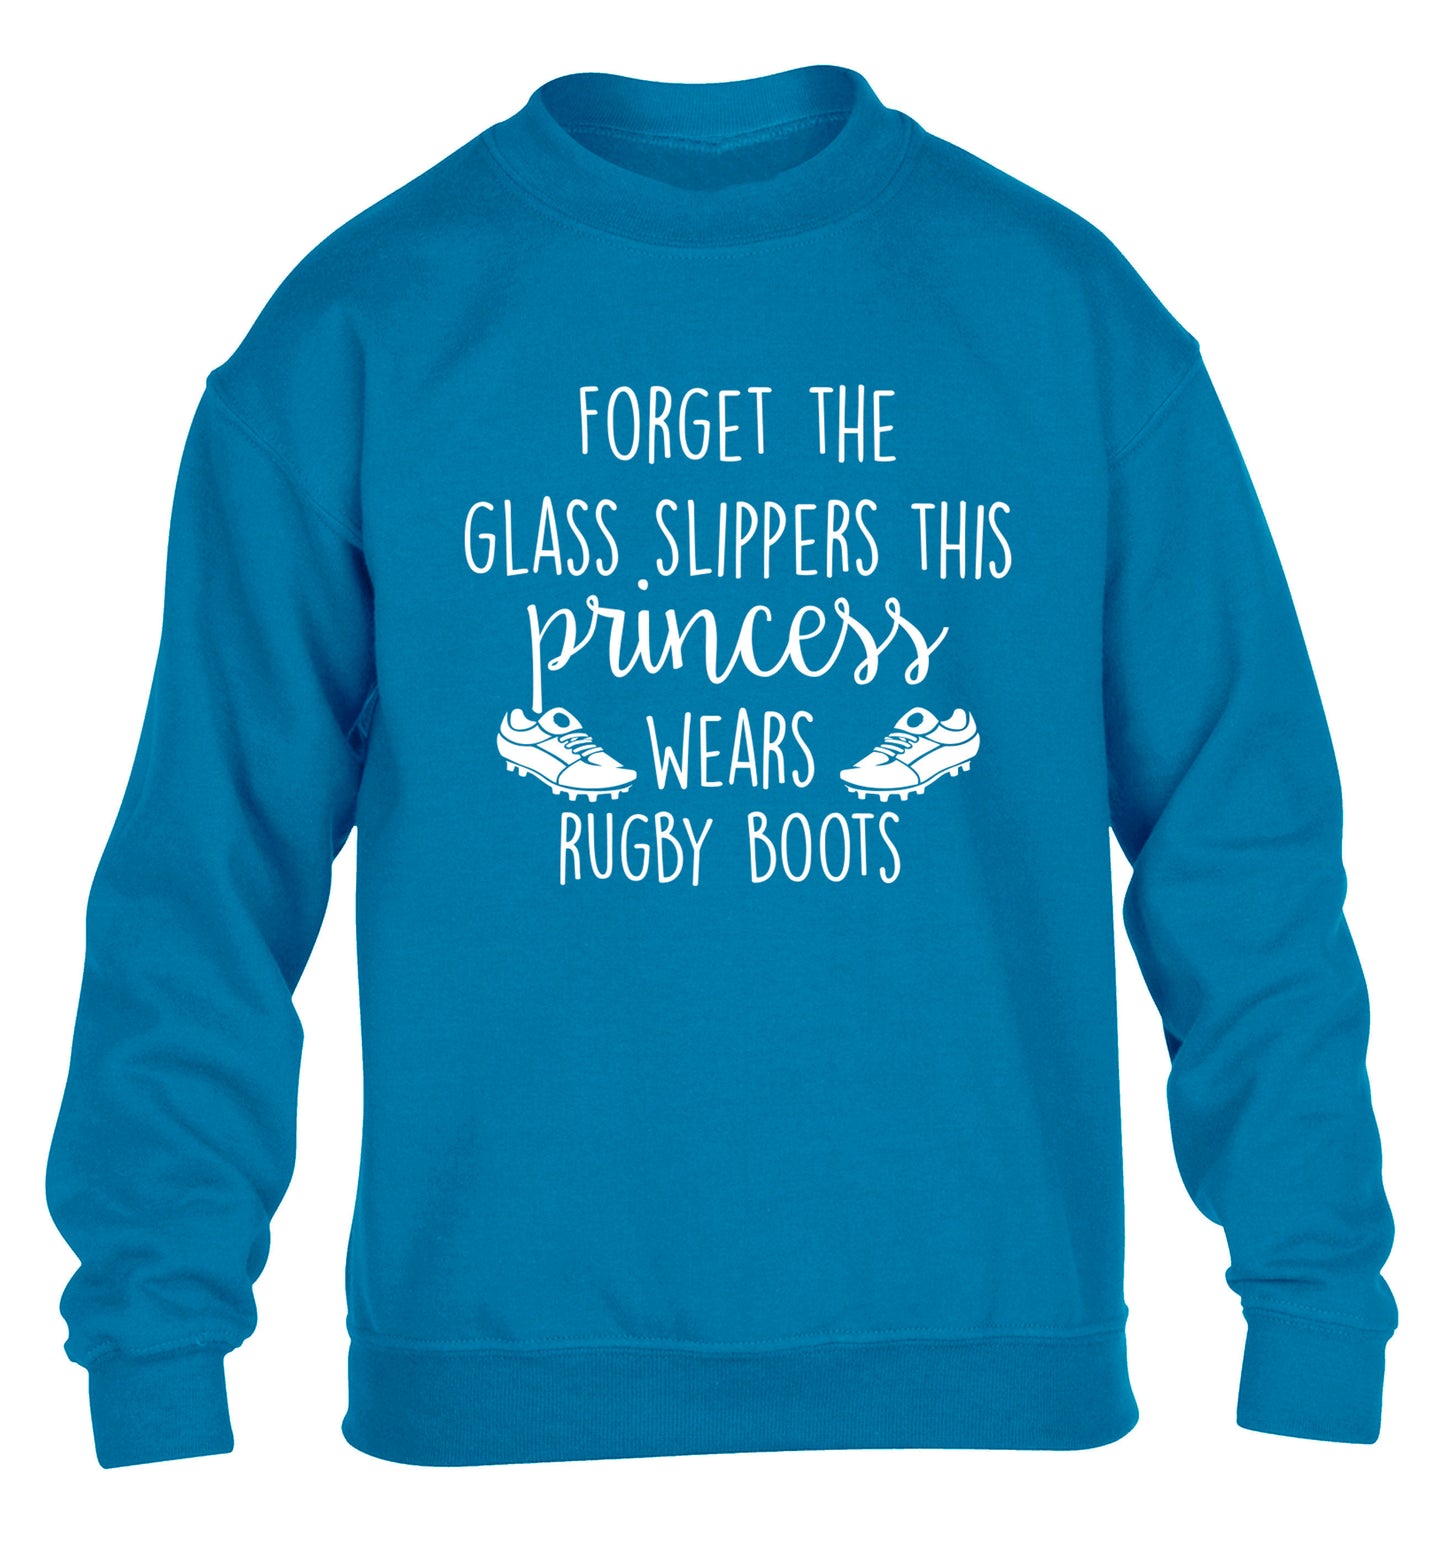 Forget the glass slippers this princess wears rugby boots children's blue sweater 12-14 Years